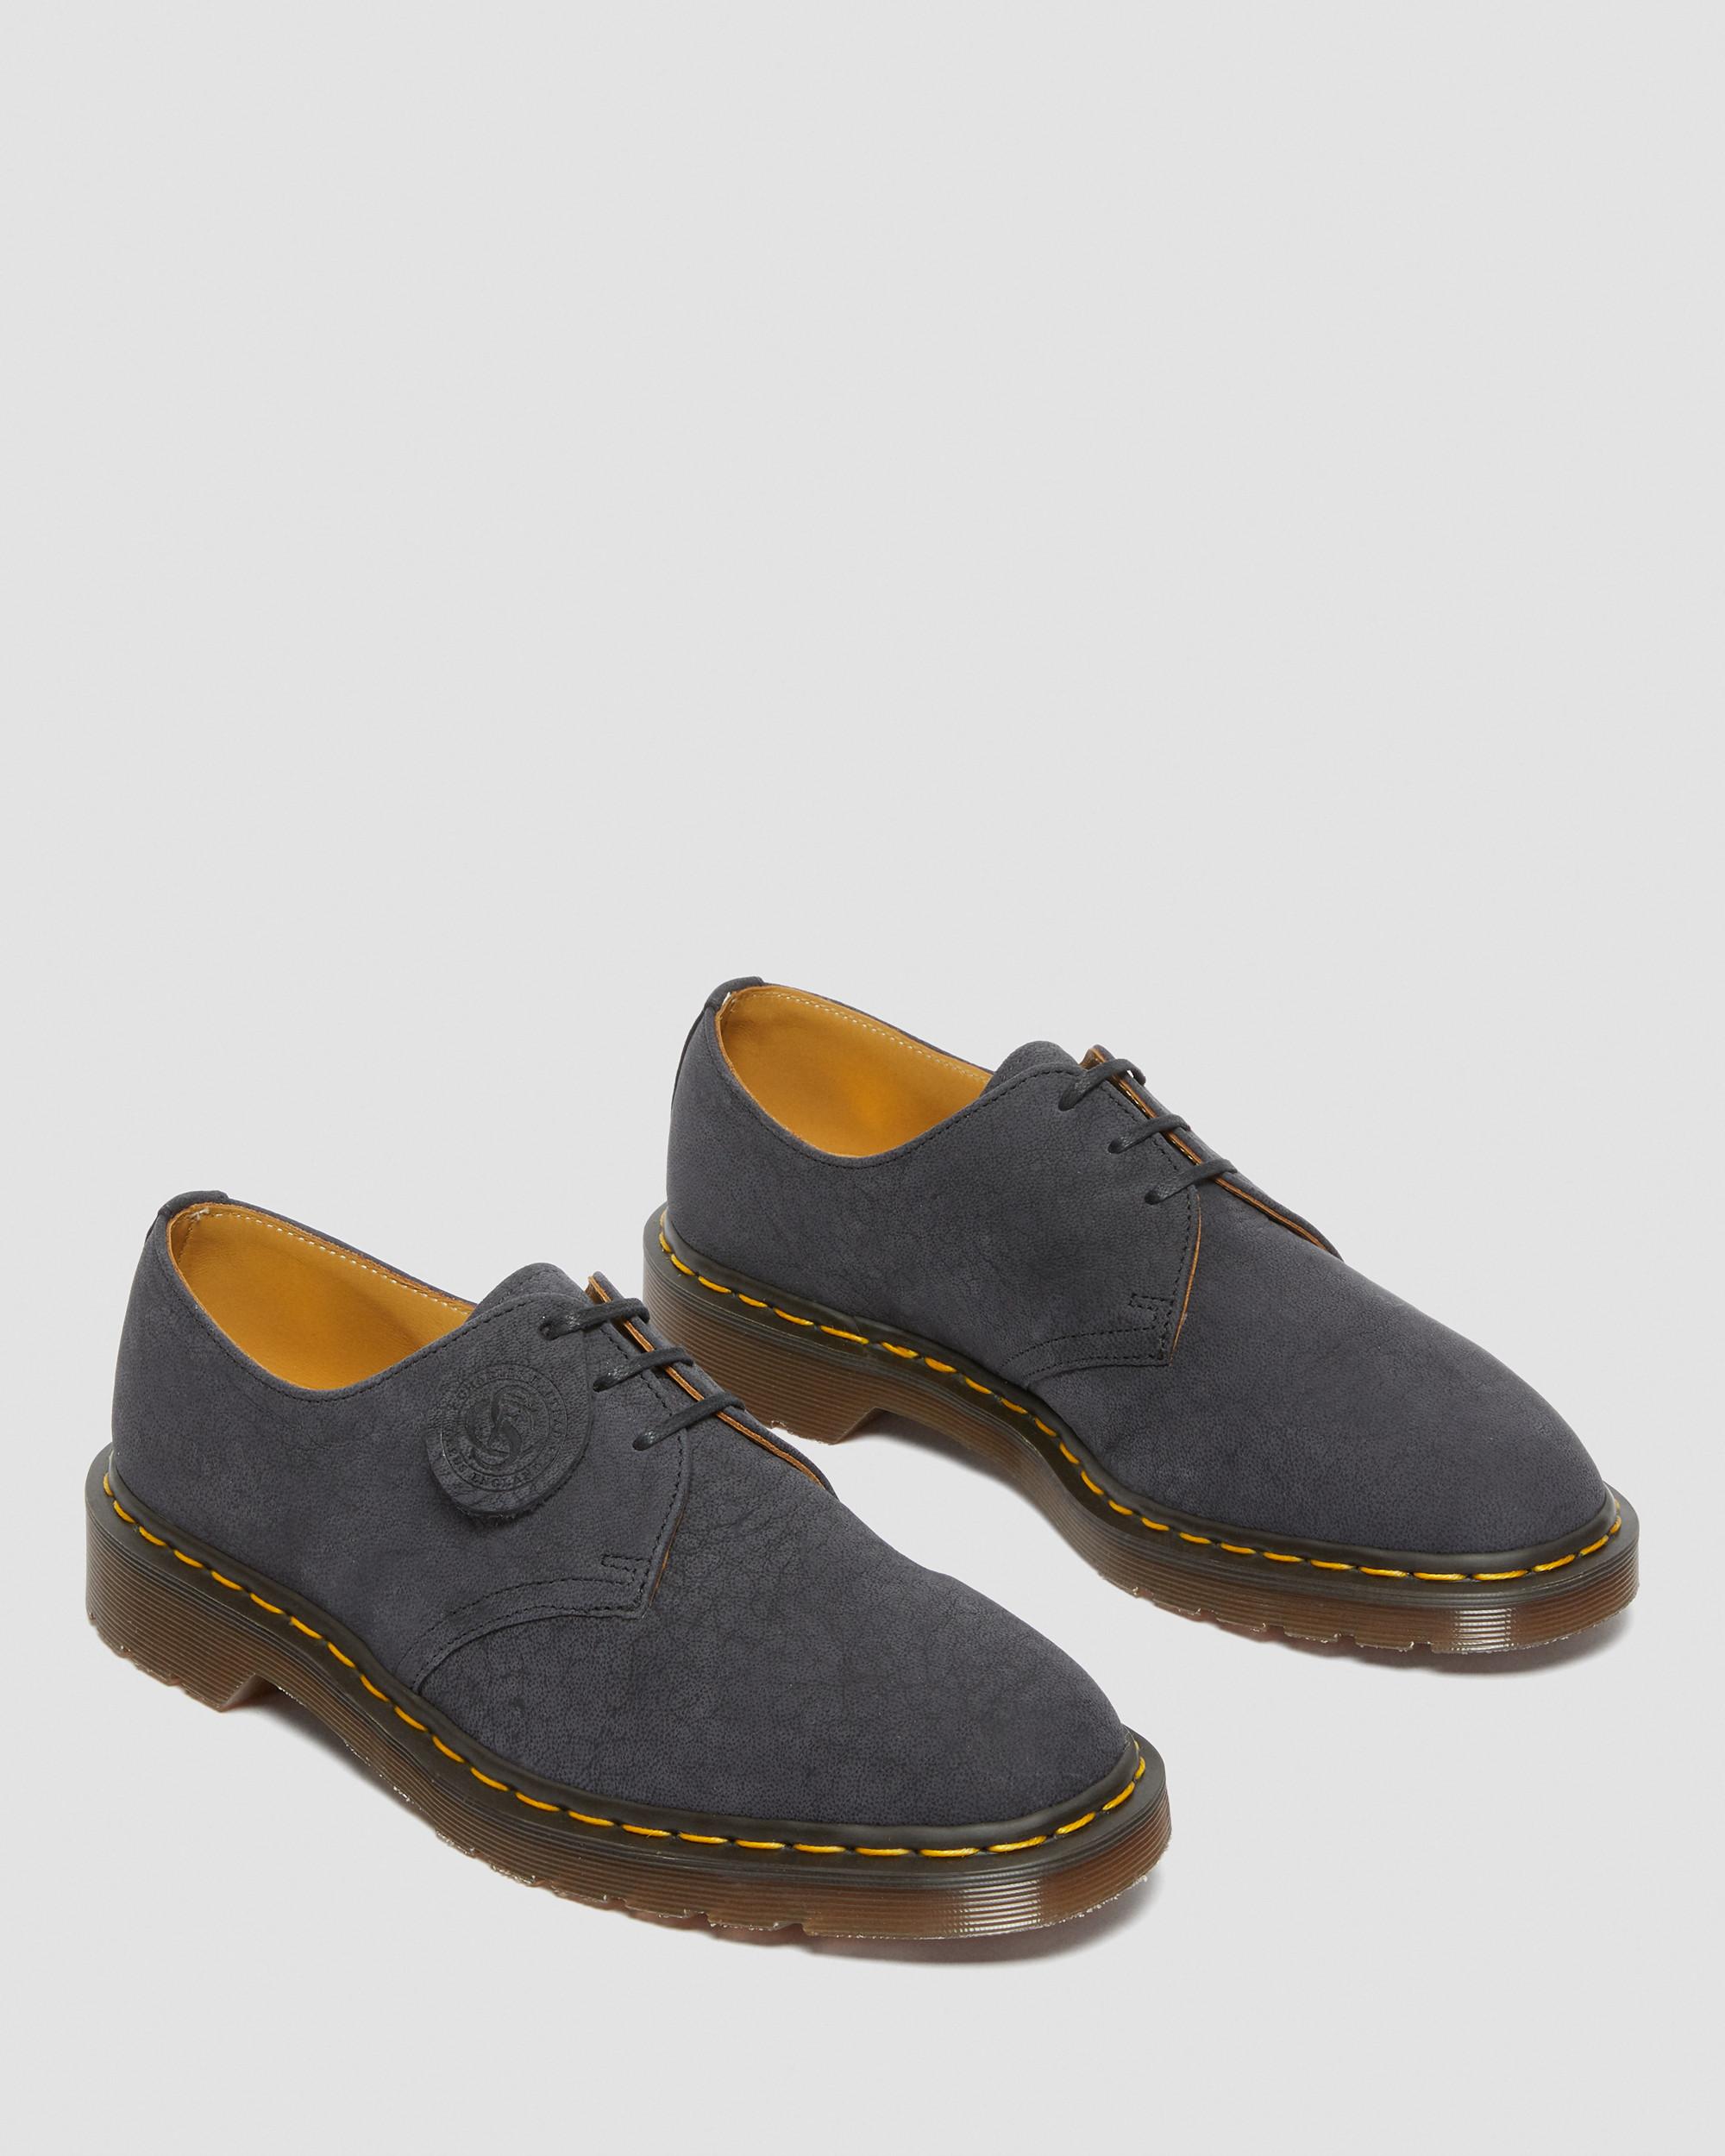 1461 Made in England Nubuck Leather Oxford Shoes in Black